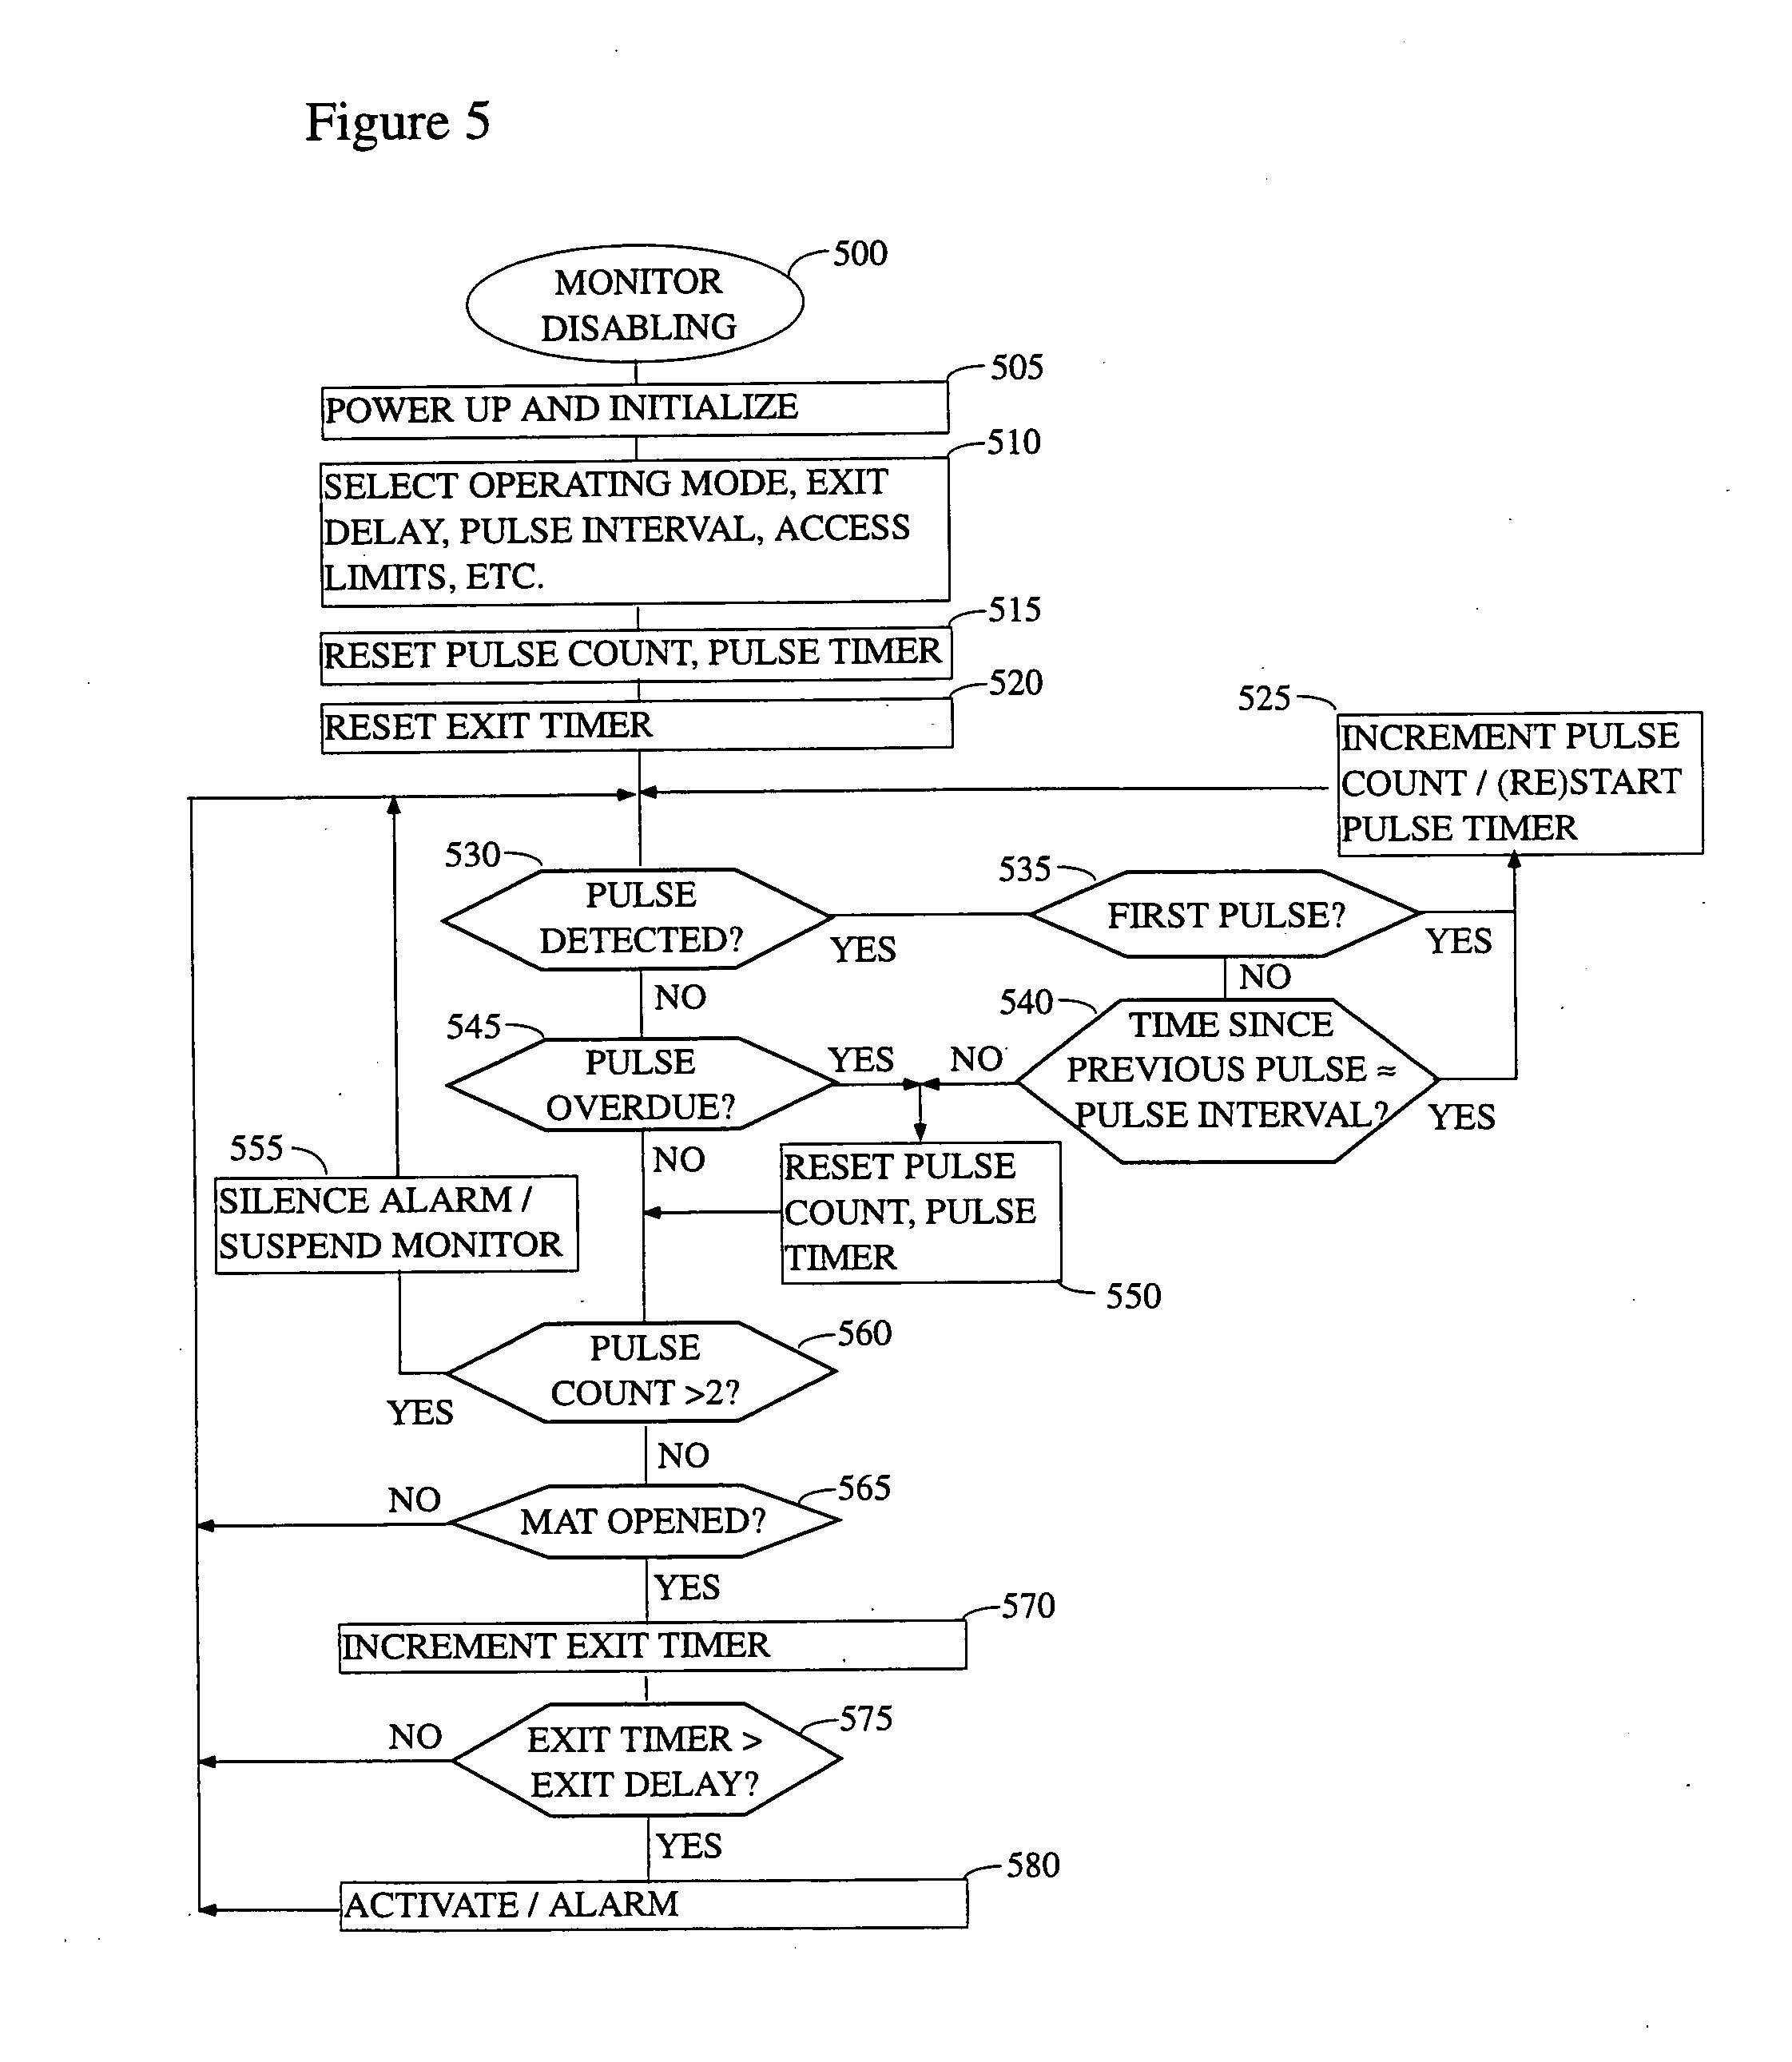 Method and apparatus for temporarily disabling a patient monitor